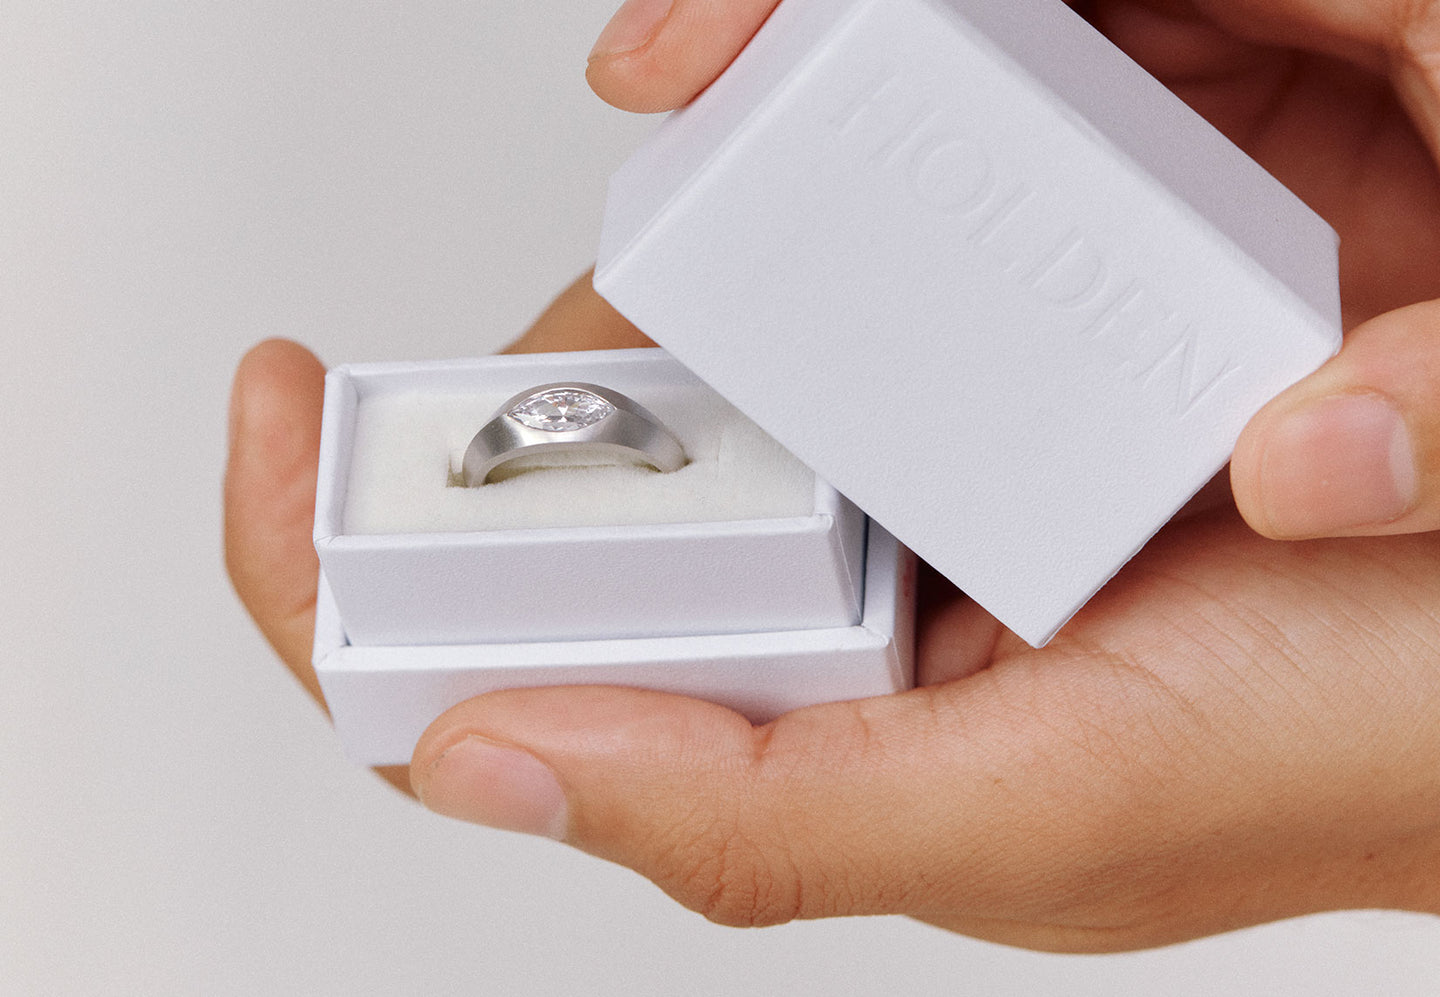 Women Proposing to Men: Why They Don't & Why They Should